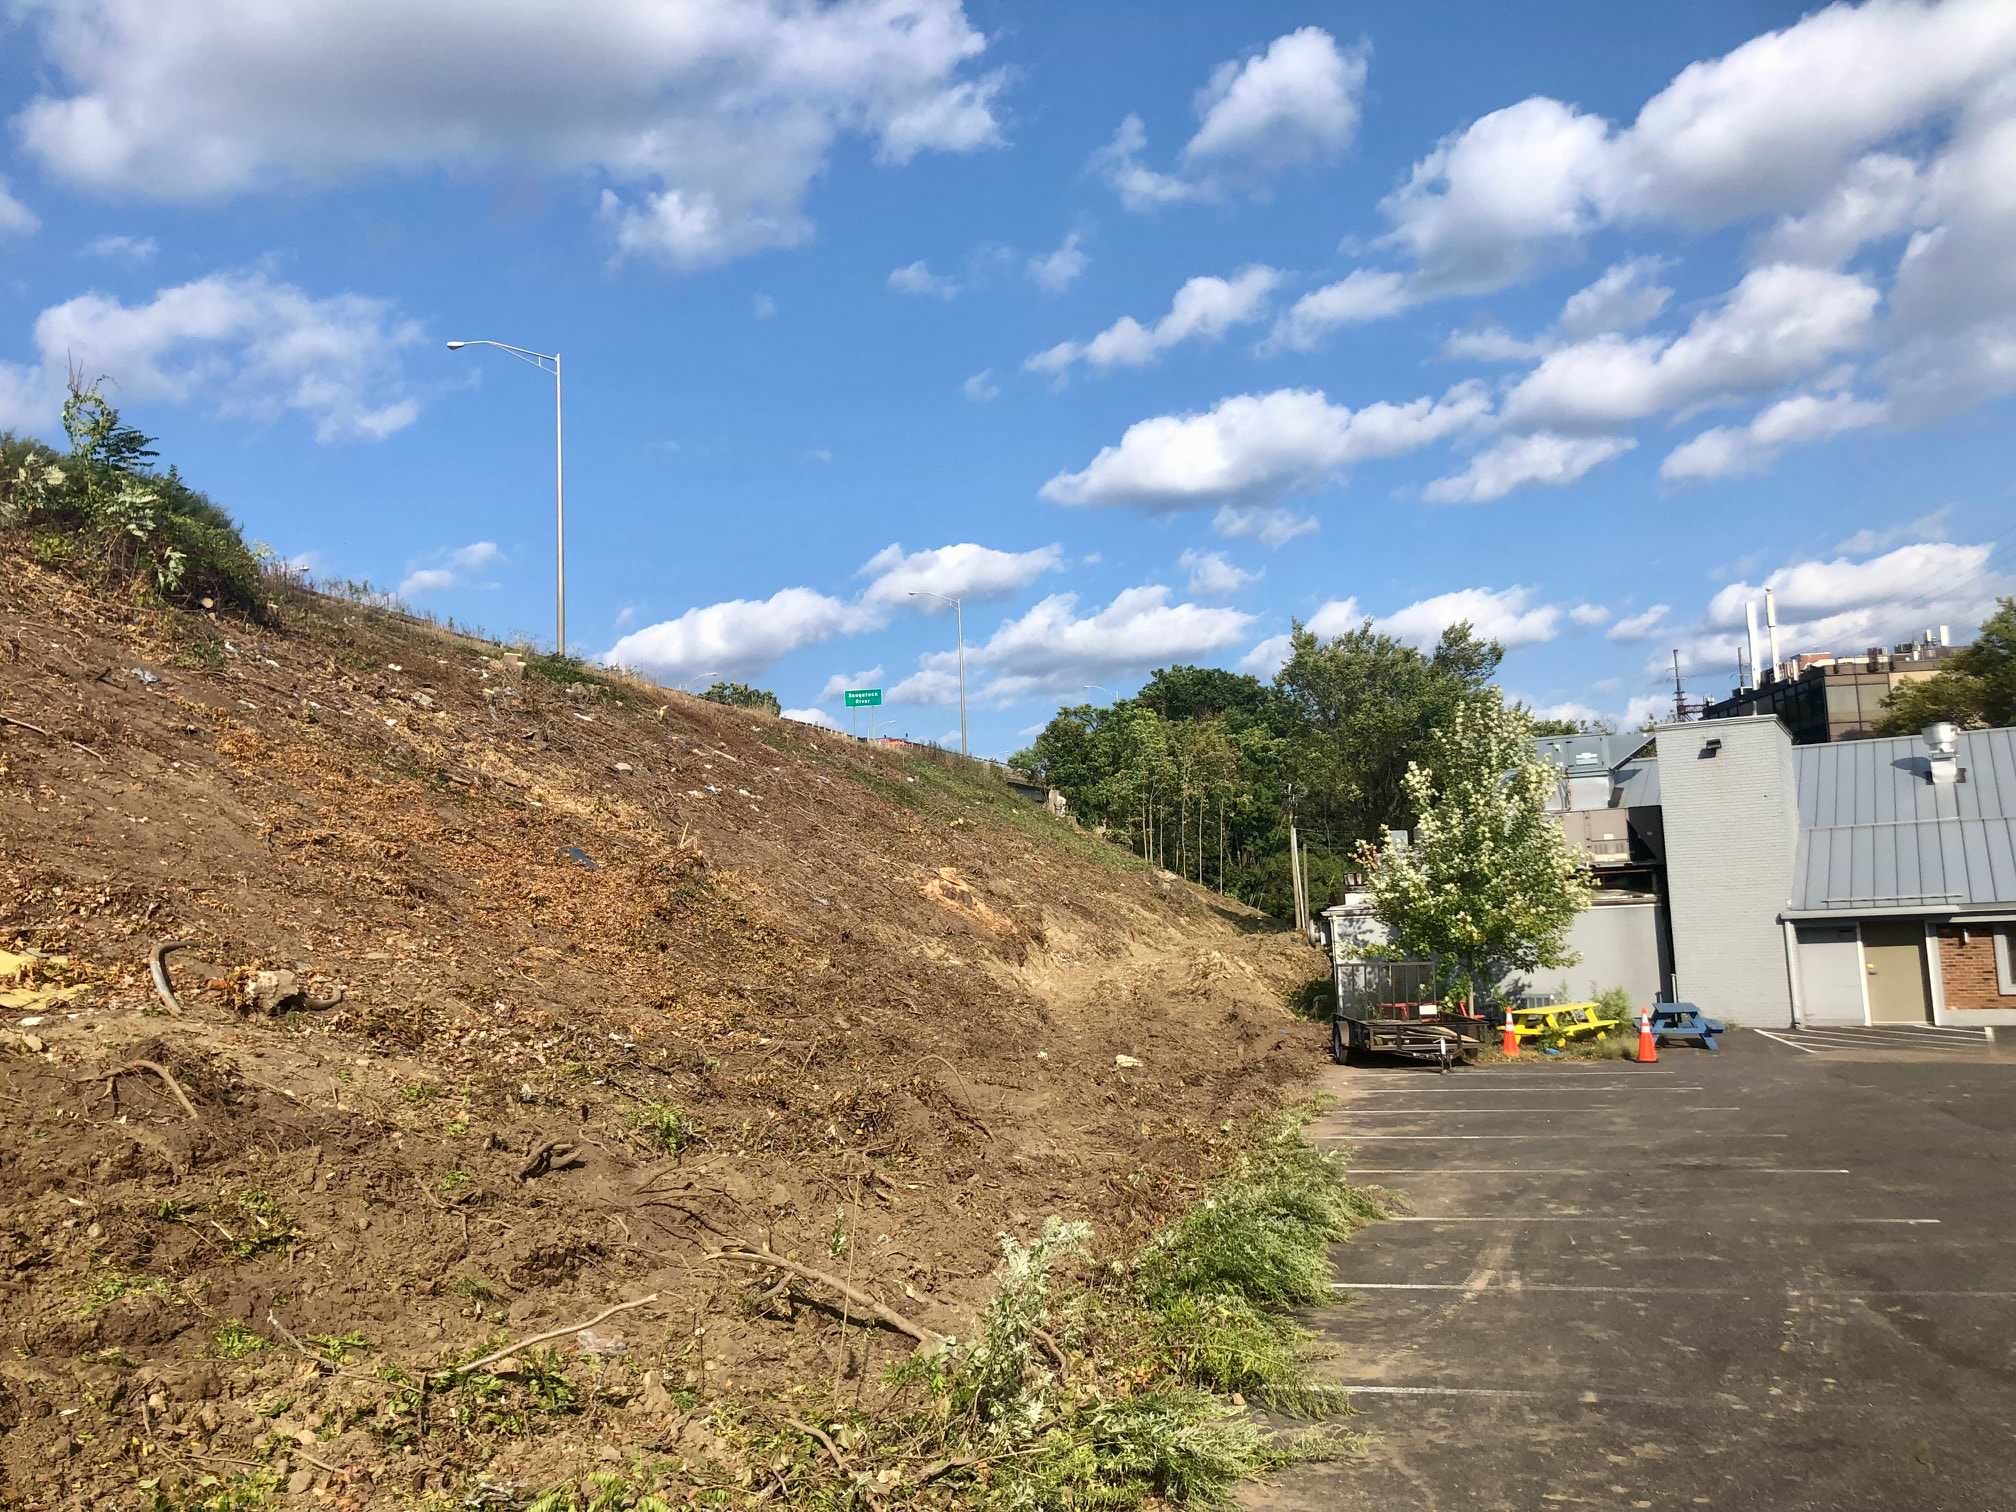 Brush has been removed from embankments. / Photo by Thane Grauel.